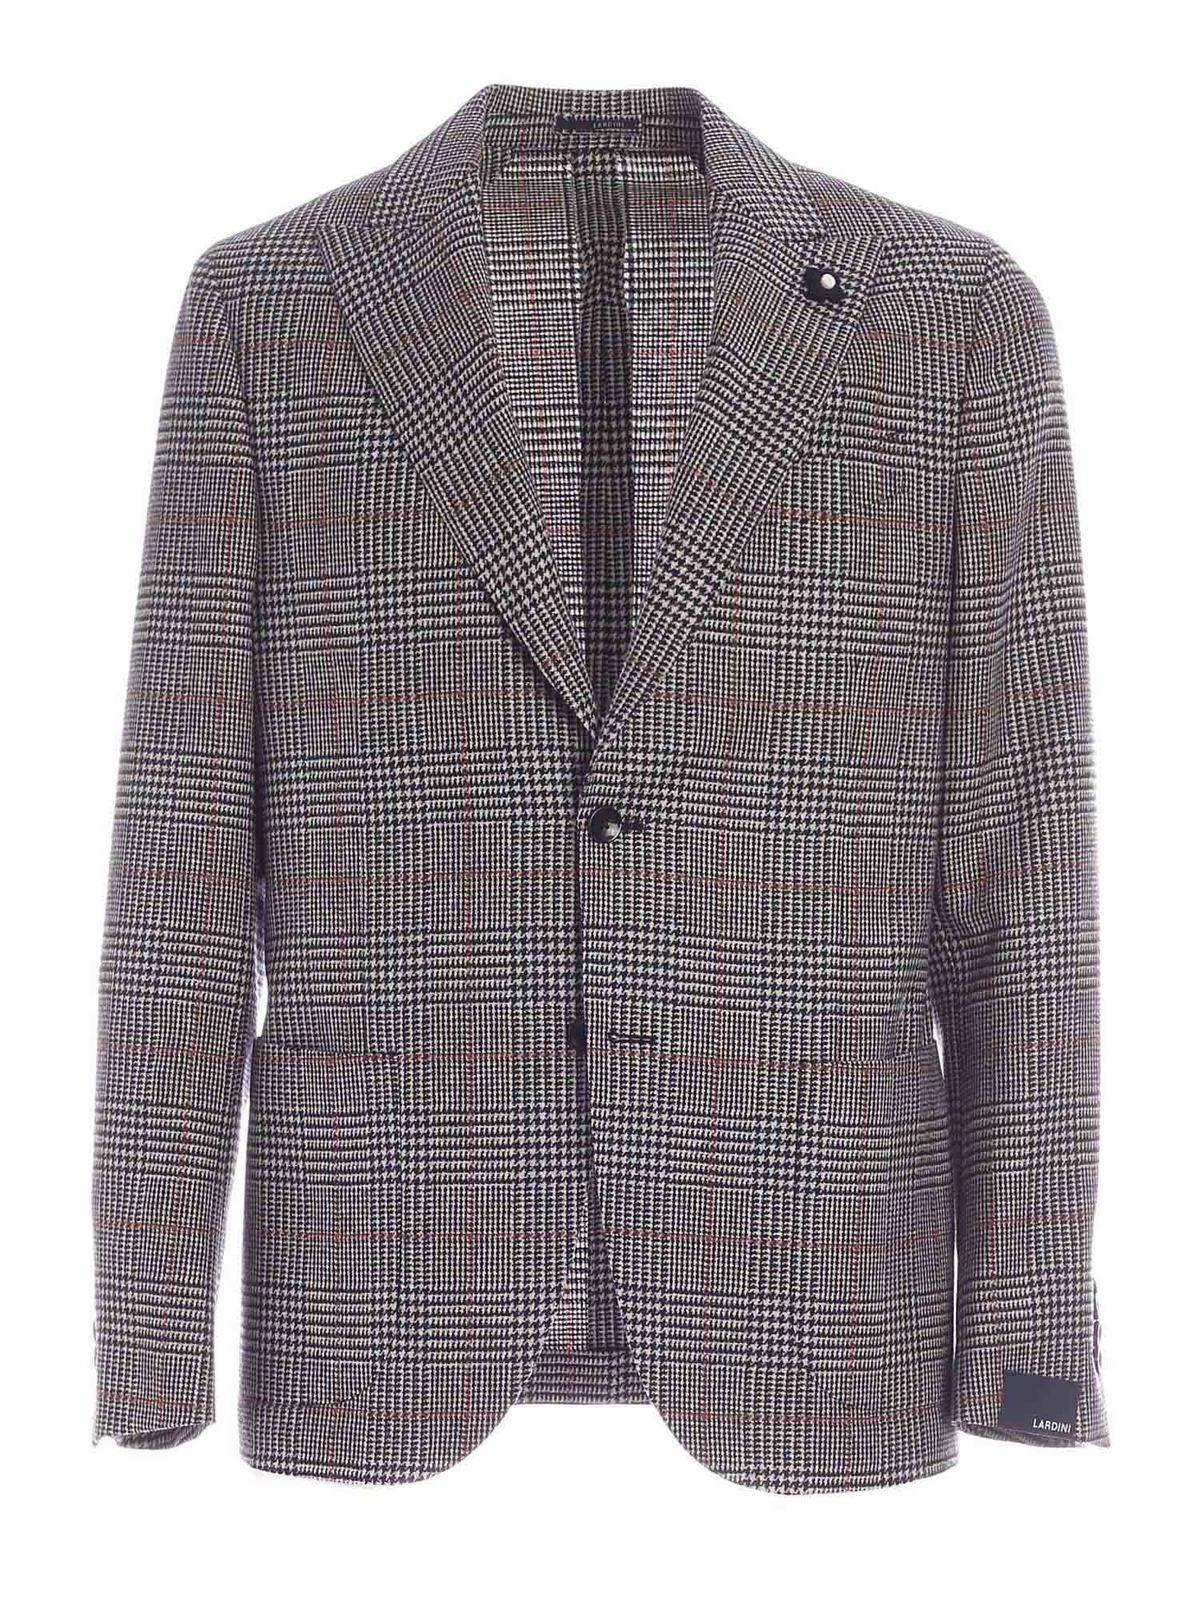 Lardini PRINCE OF WALES CHECK BLUE AND BEIGE JACKET